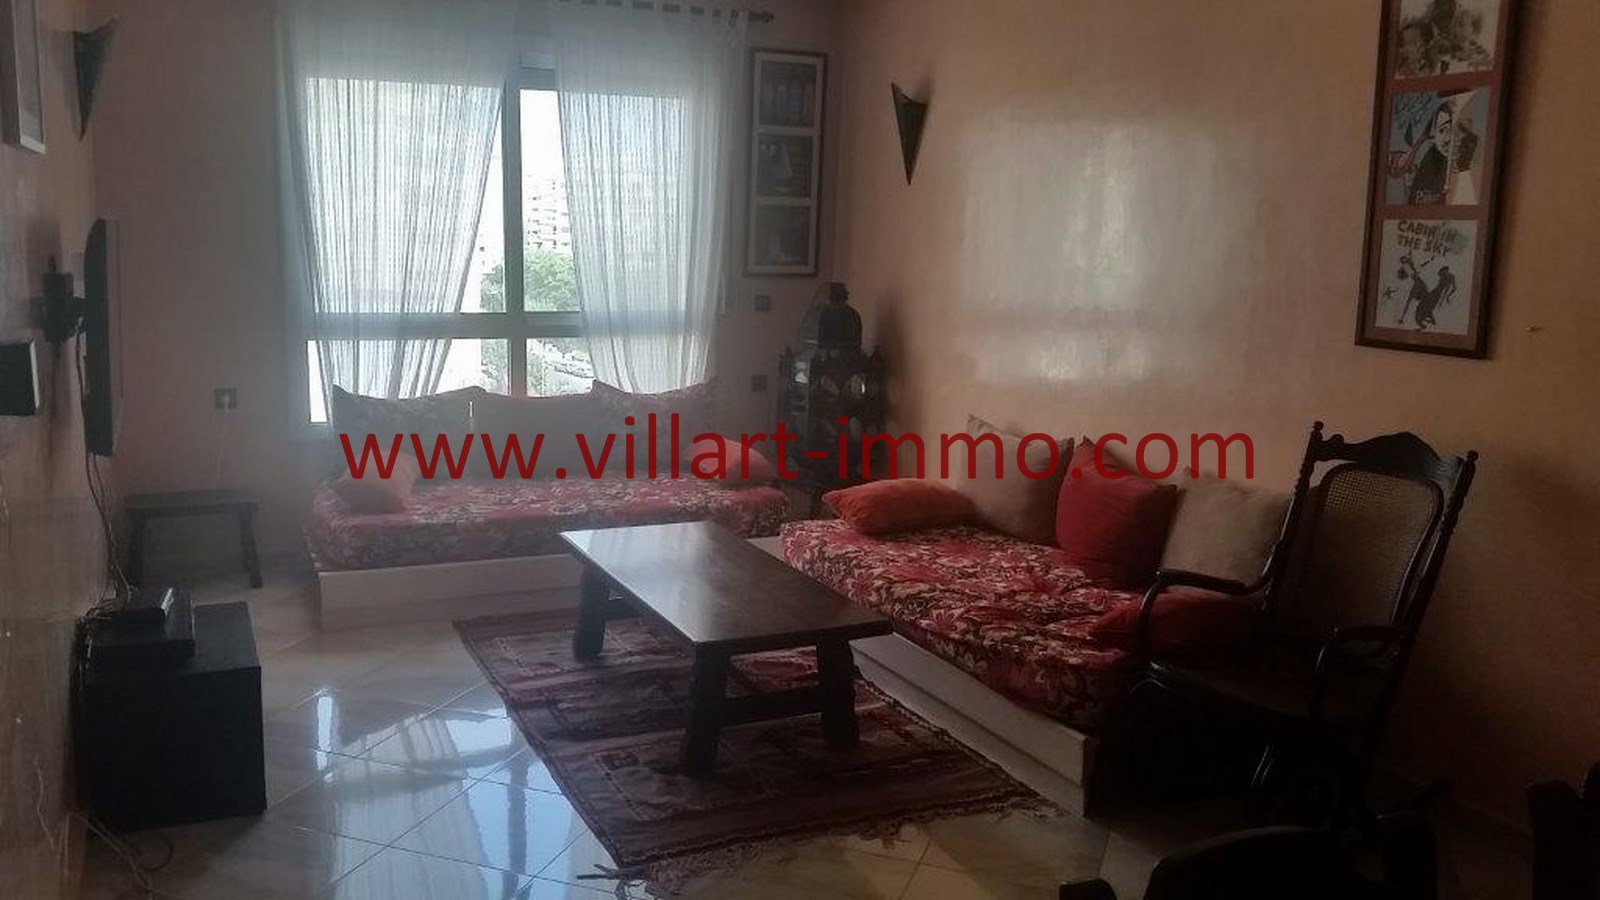 2-location-appartement-meuble-tanger-salon-l856-villart-immo-agence-immobiliere